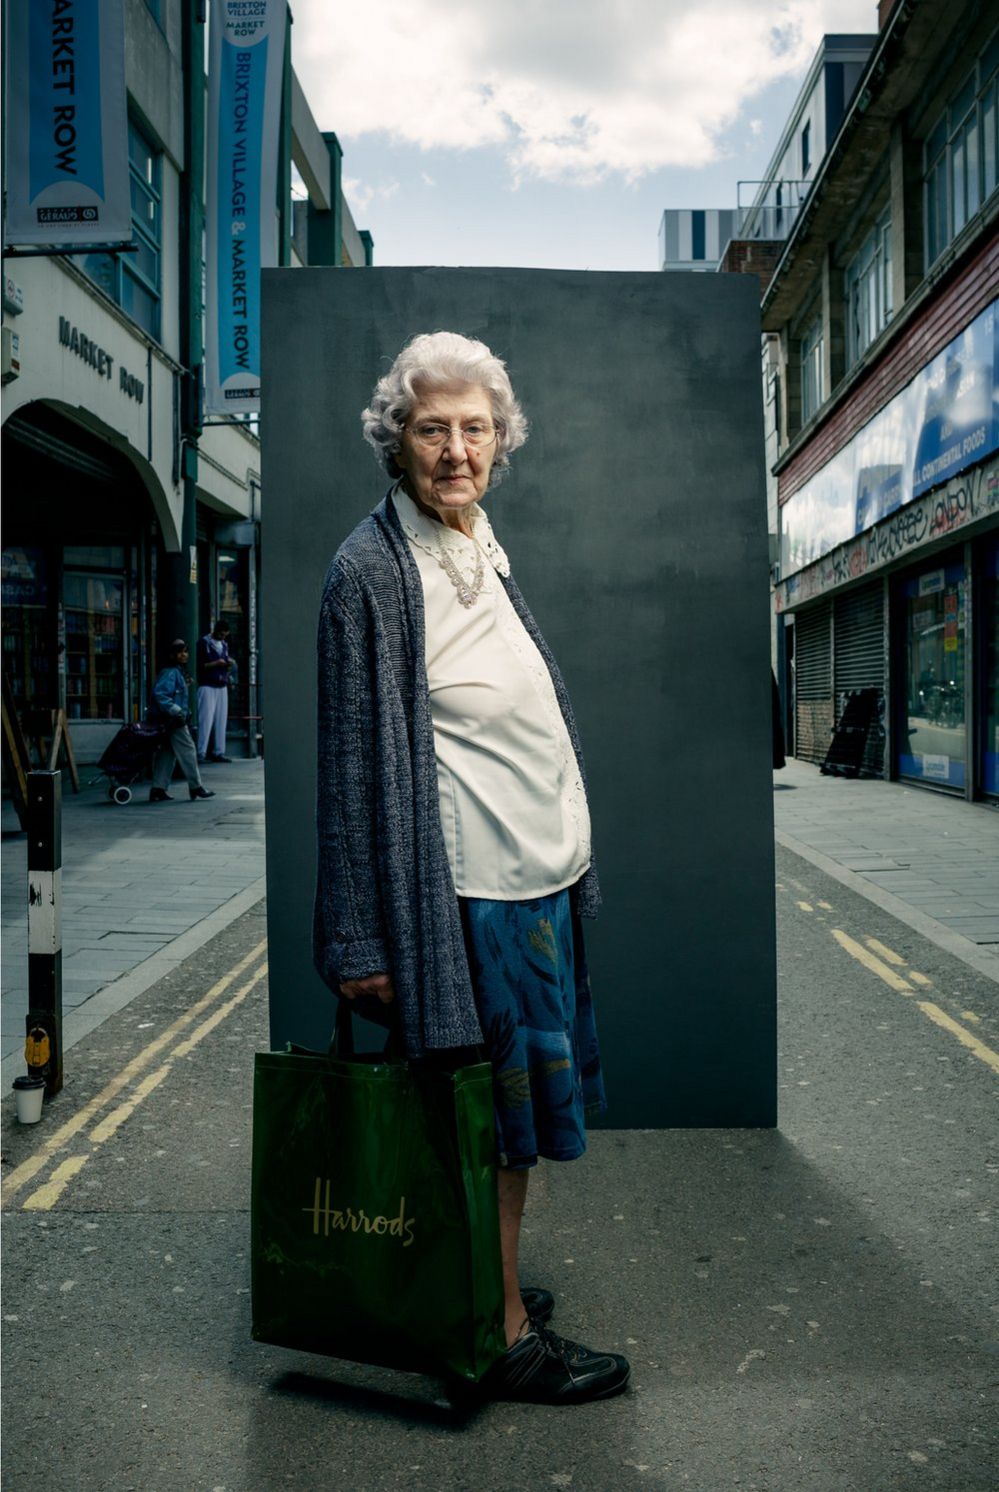 Portrait of a woman in the street holding a shopping bag